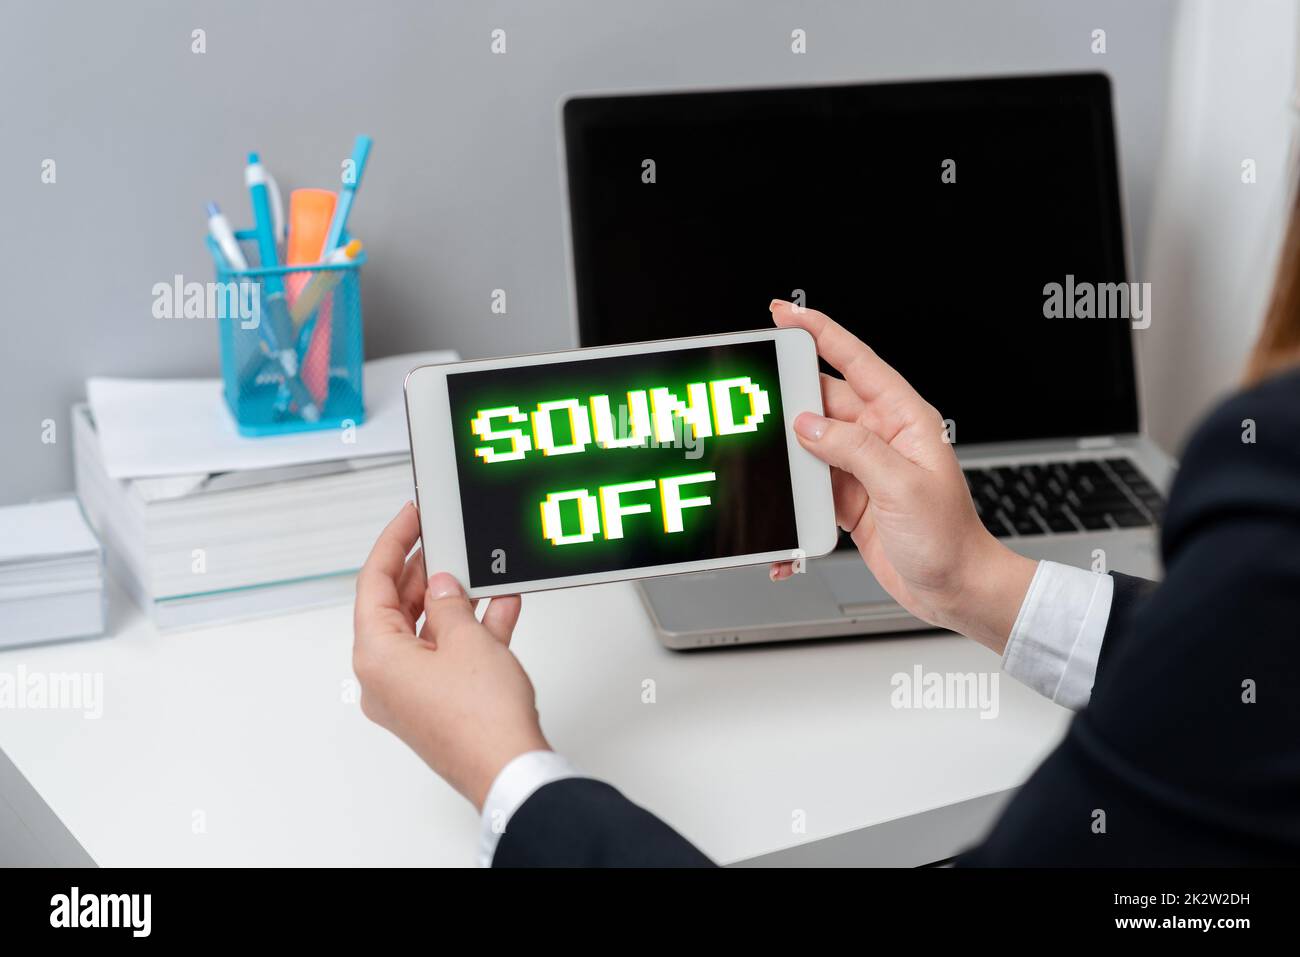 Hand writing sign Sound Off. Internet Concept To not hear any kind of sensation produced by stimulation -47522 Stock Photo